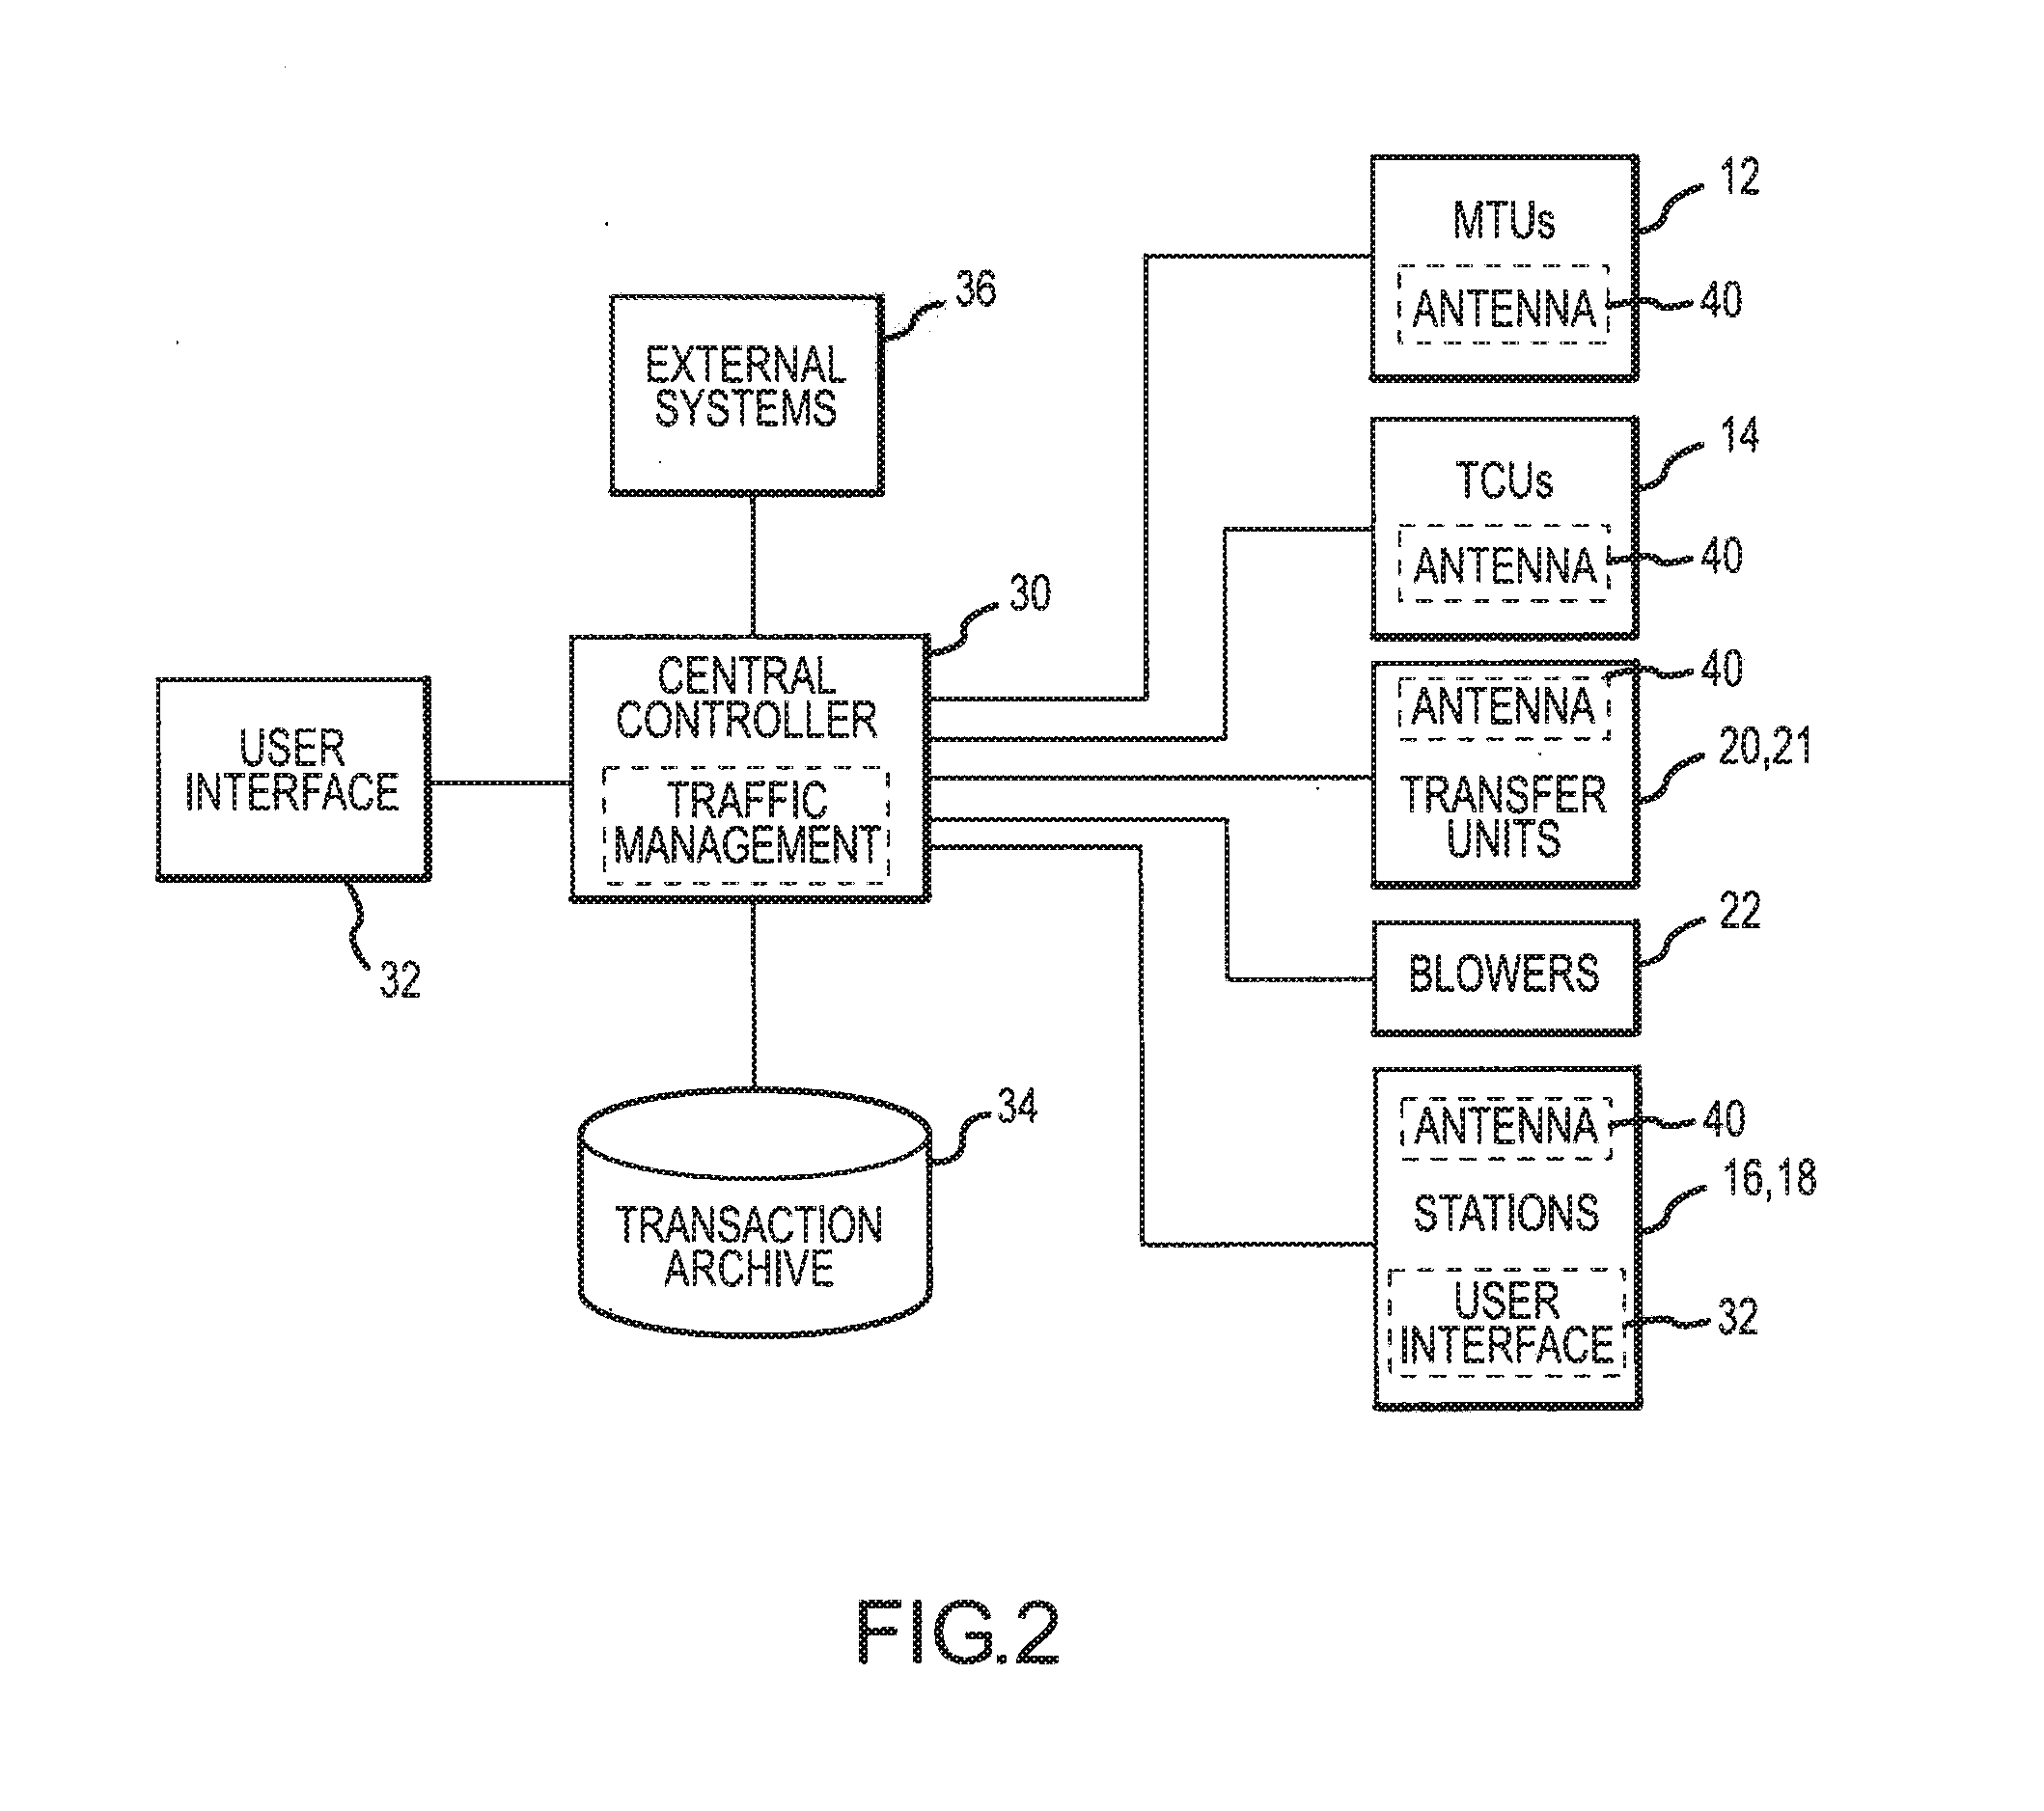 Air powered storage device for pneumatic transport system